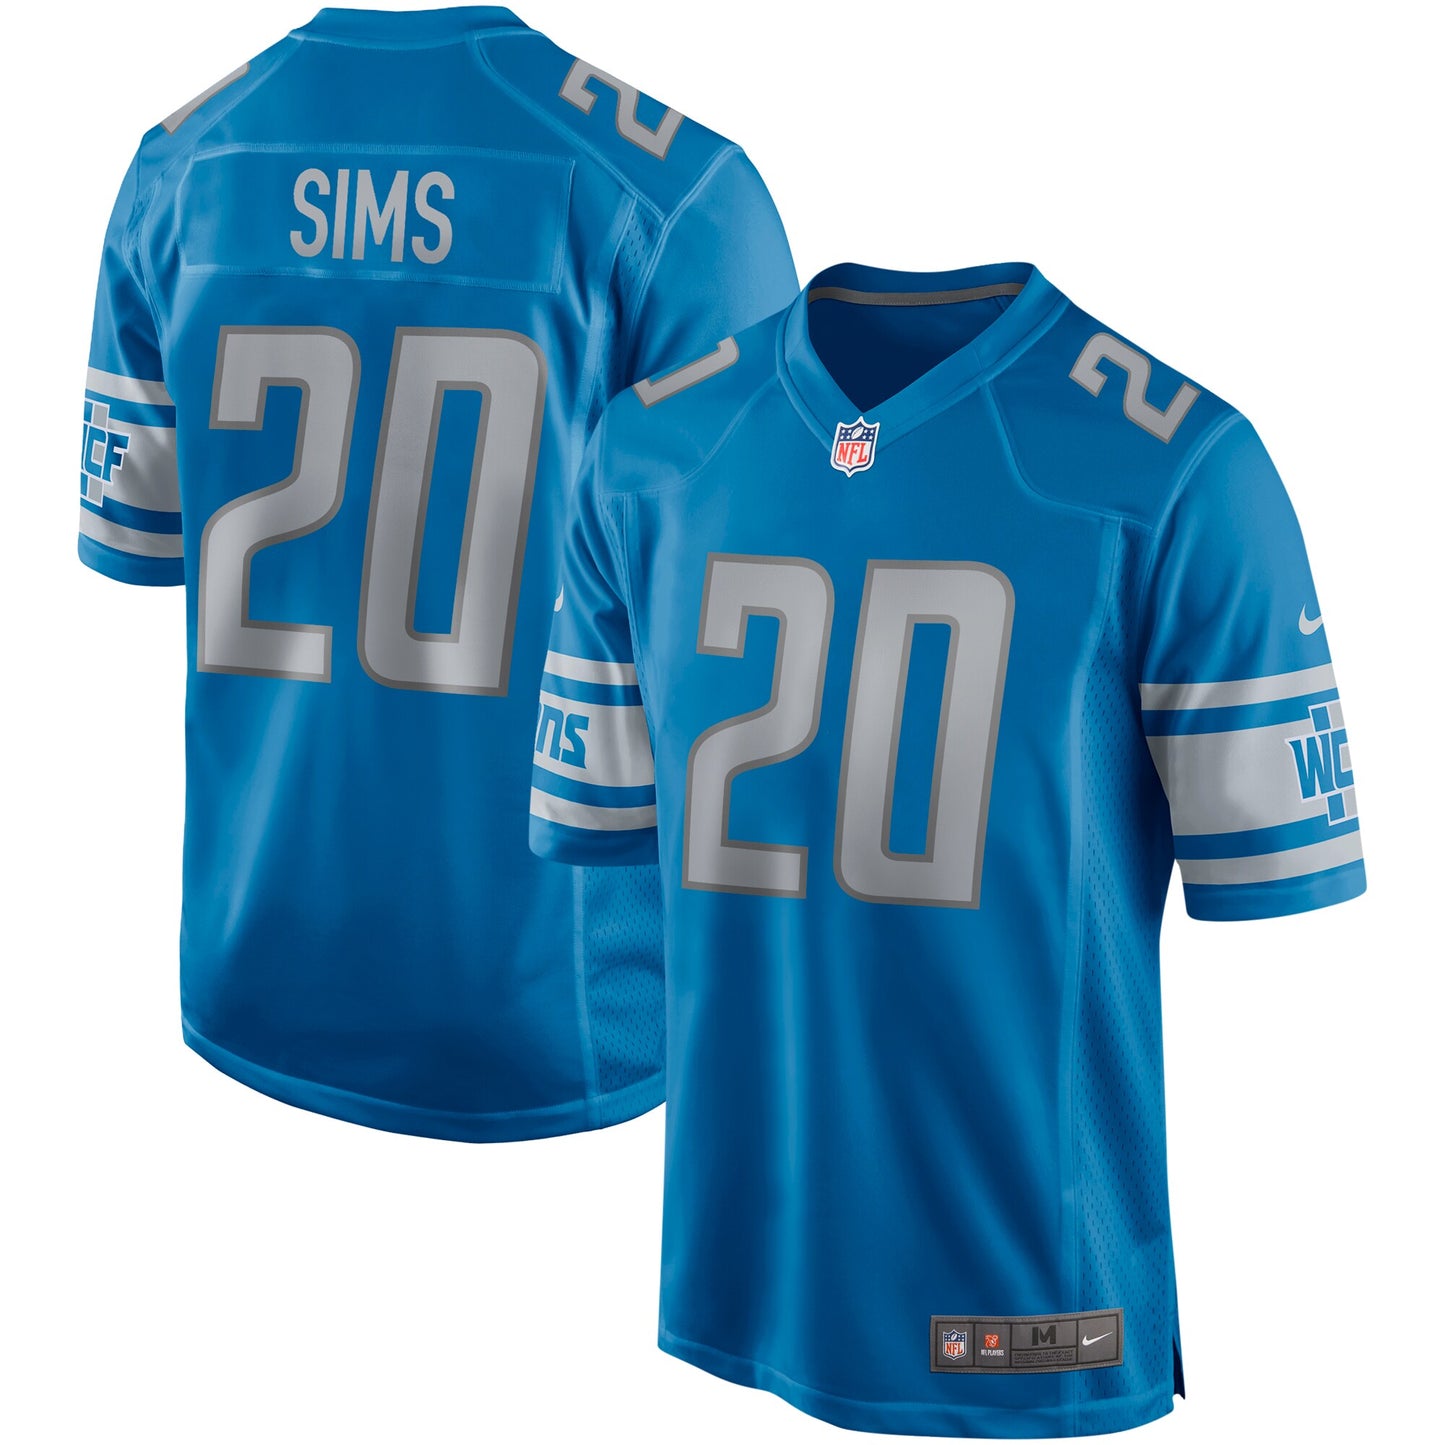 Billy Sims Detroit Lions Nike Game Retired Player Jersey - Blue